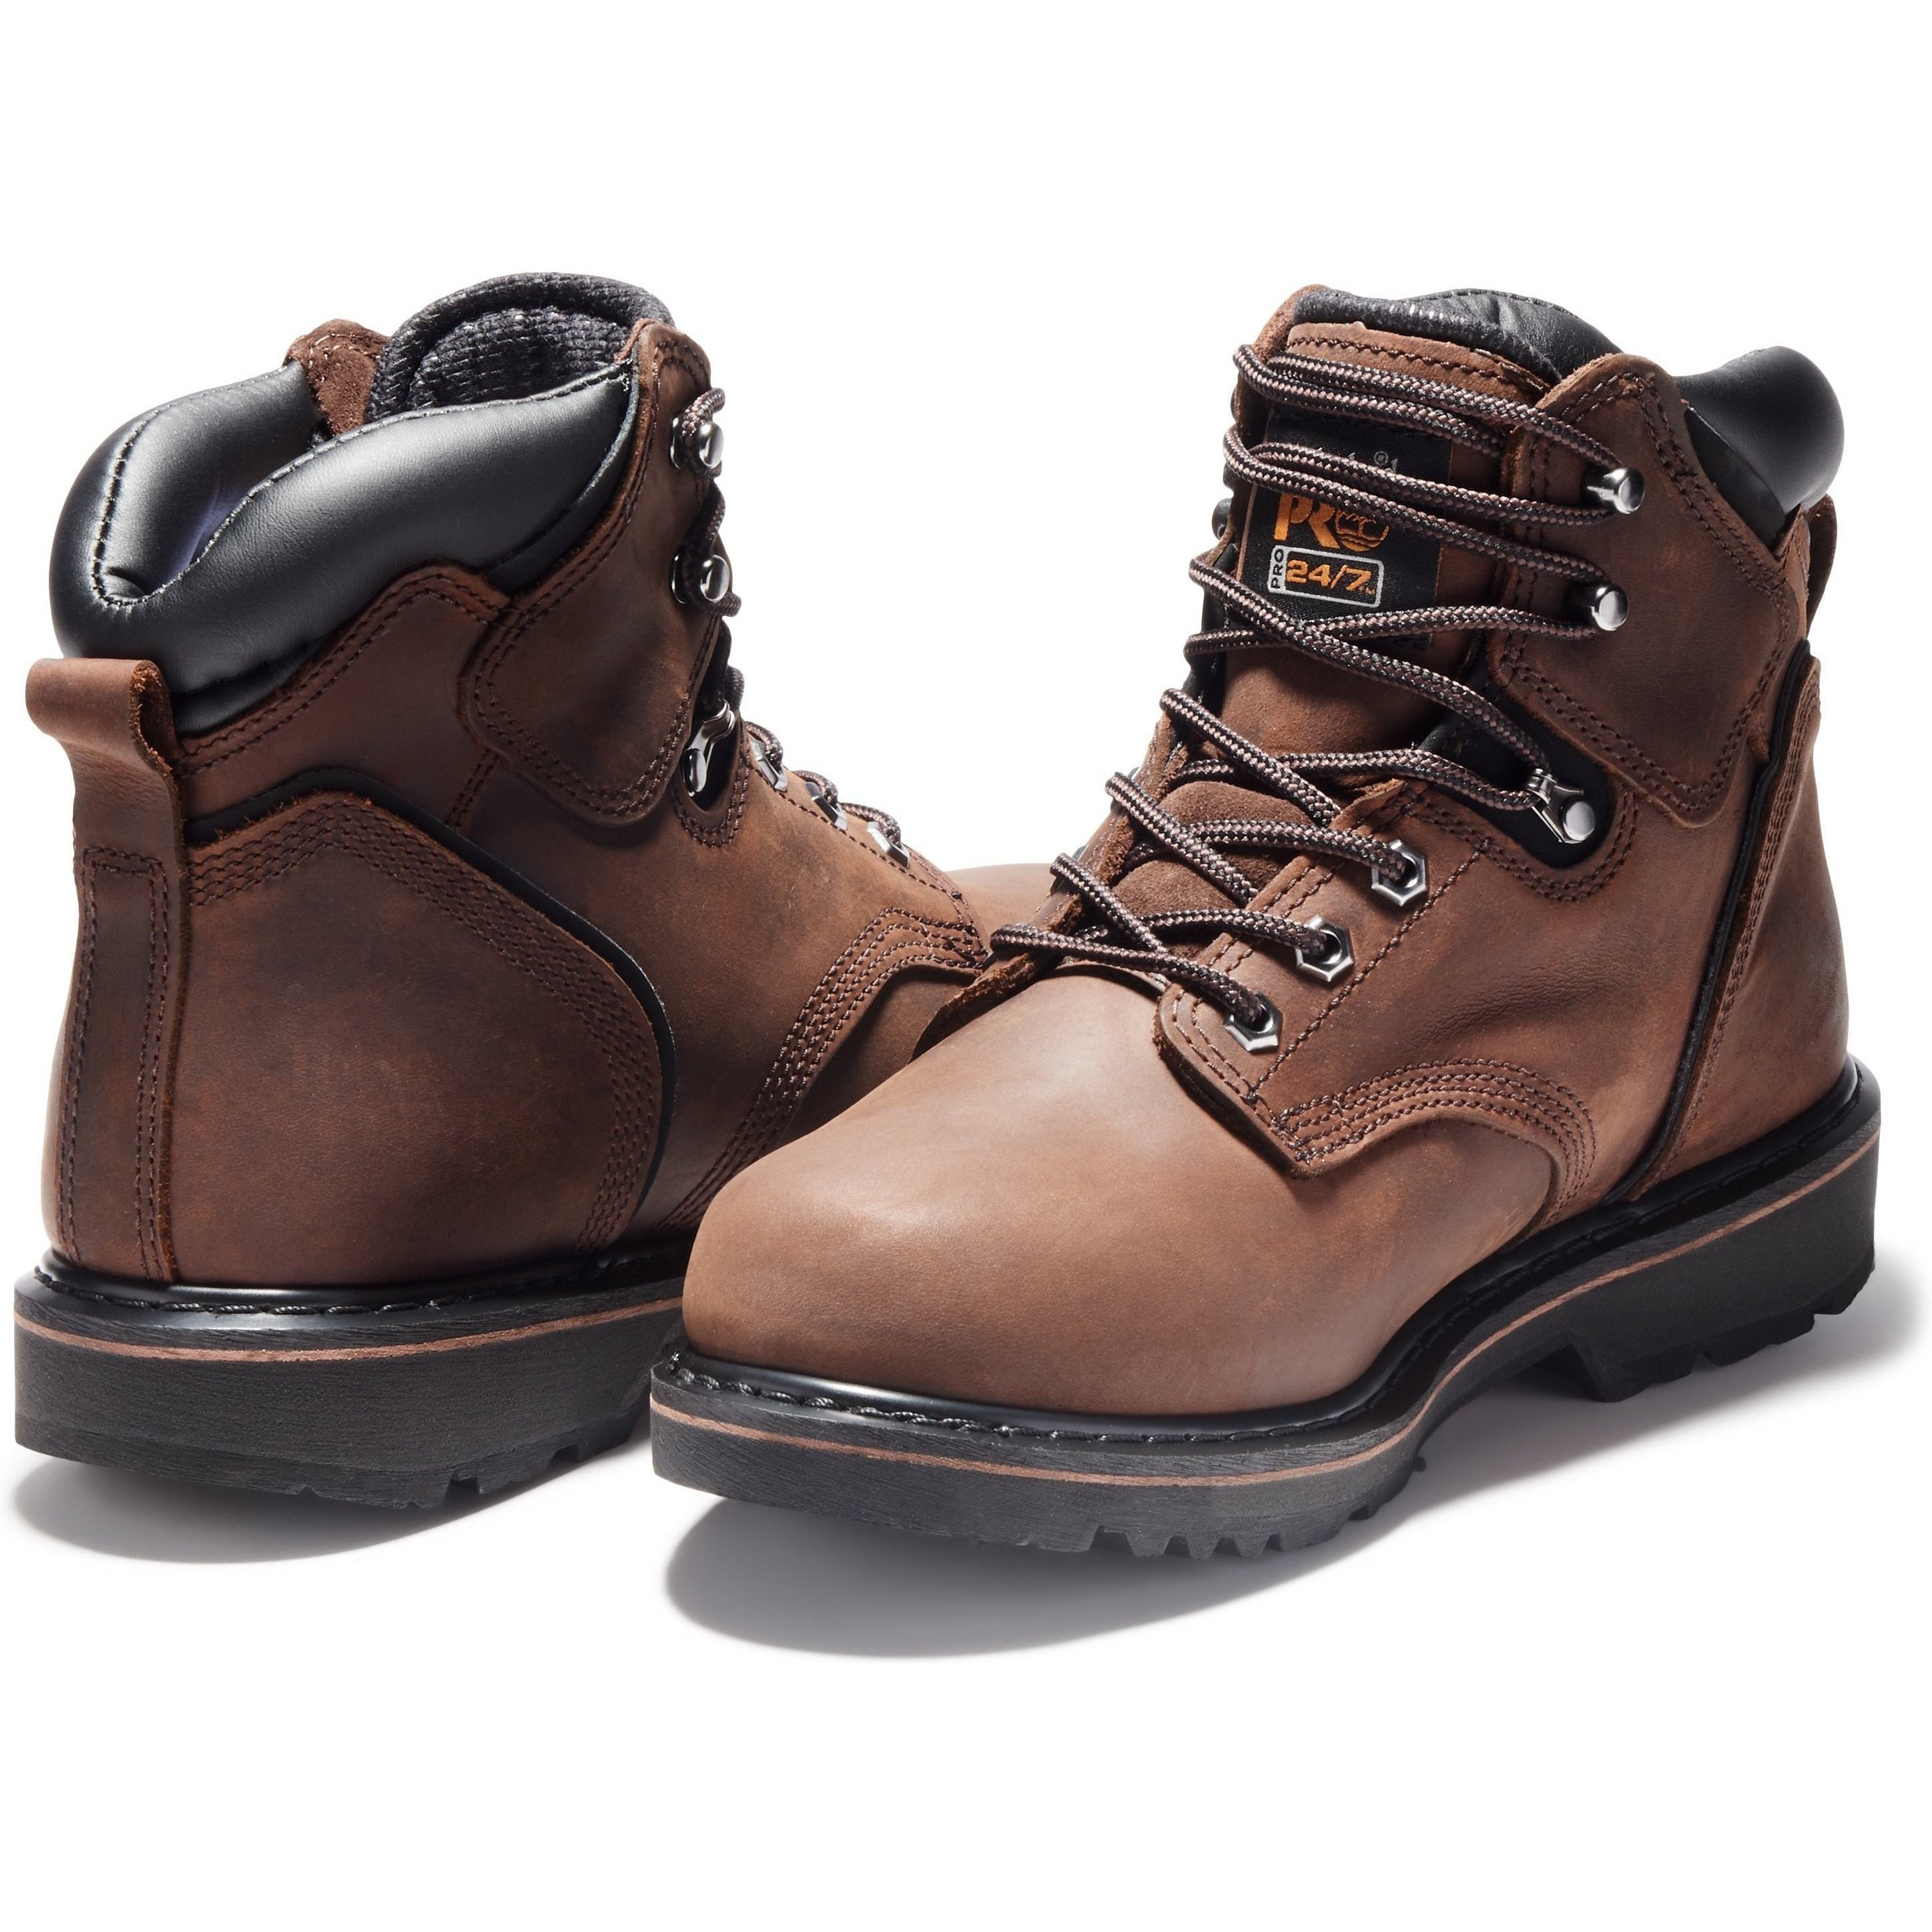 Timberland PRO Men's Pit Boss 6" Soft Toe Work Boots Brown TB133046214  - Overlook Boots